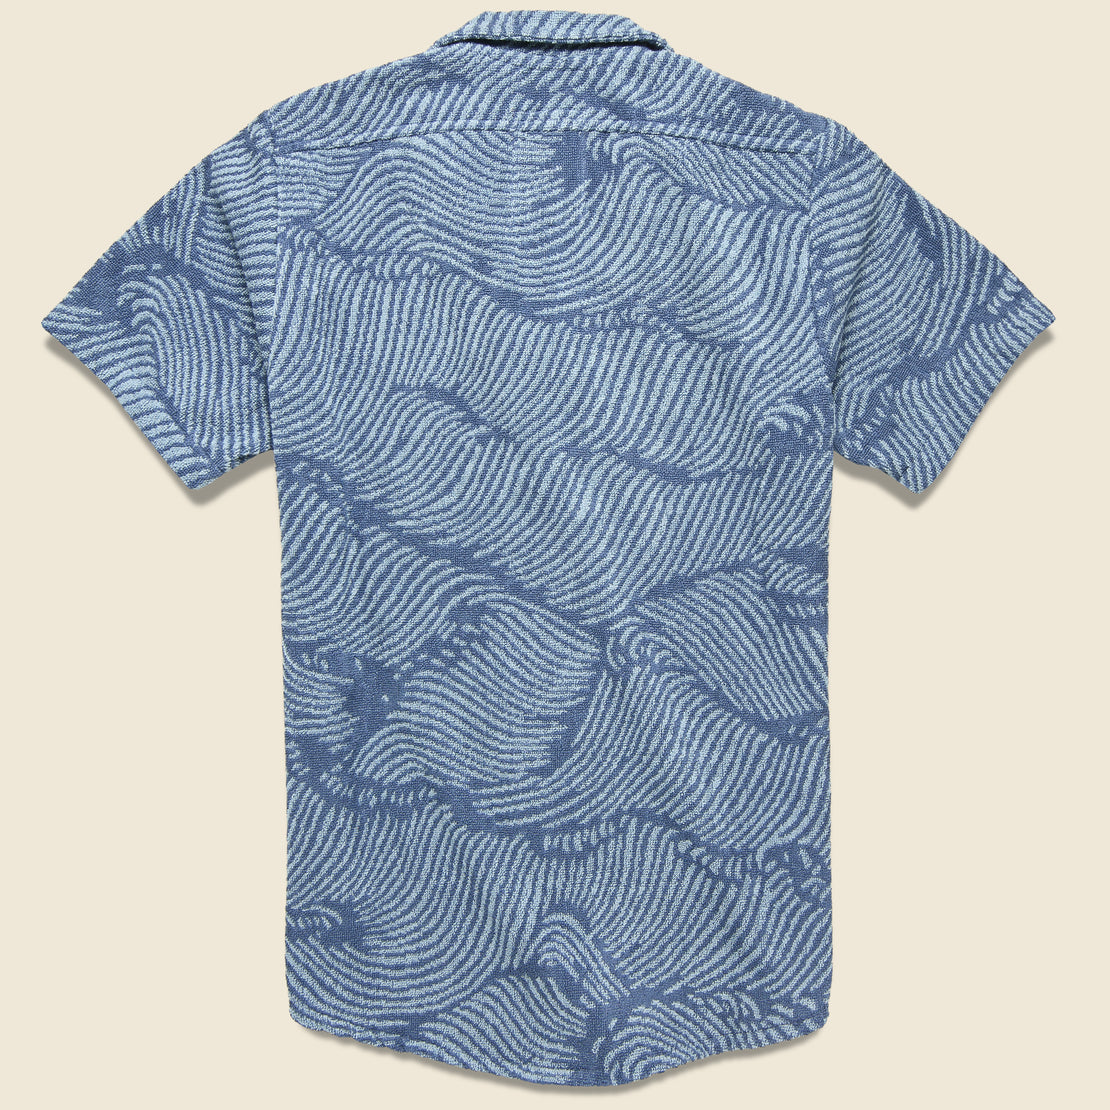 Wavy Terry Shirt - Blue - OAS - STAG Provisions - Tops - S/S Knit